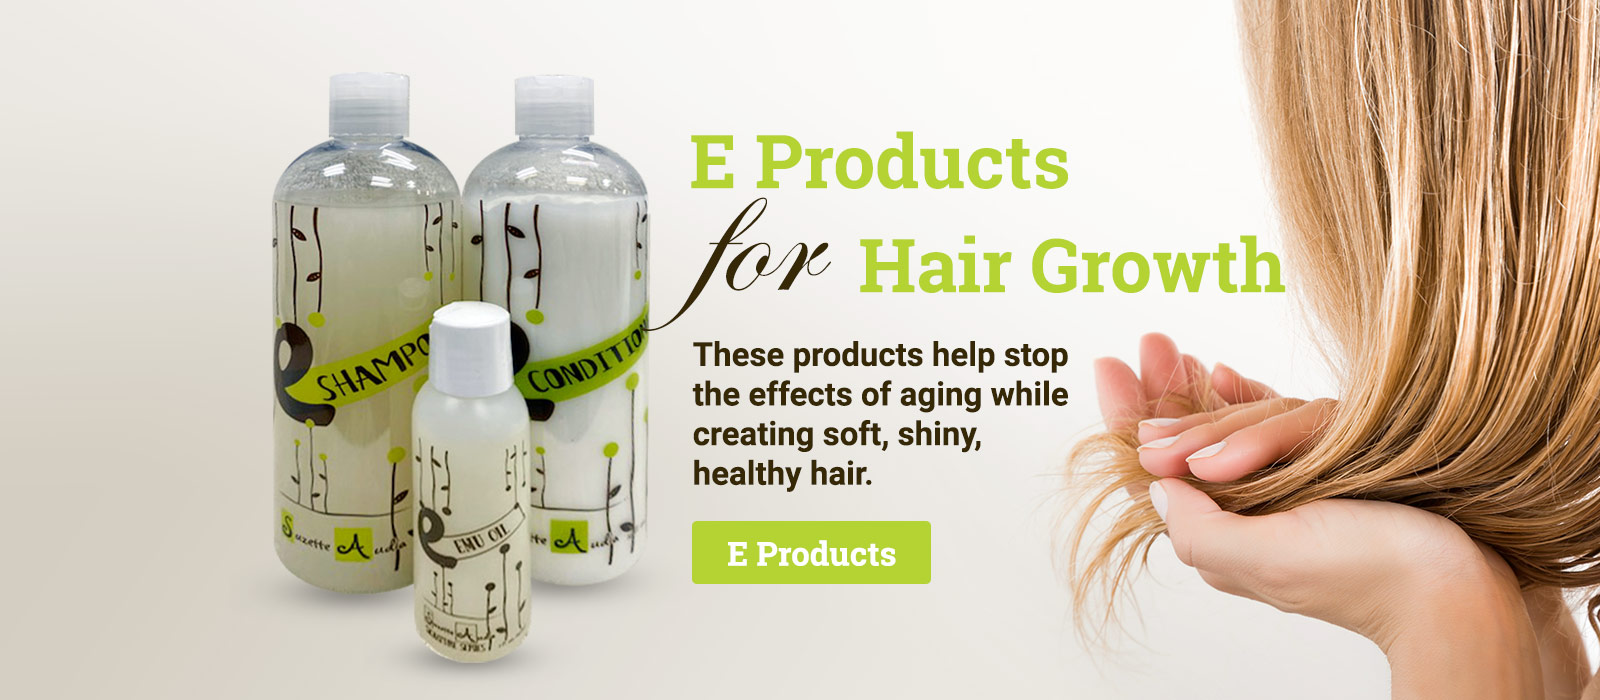 E Products for Hair Growth